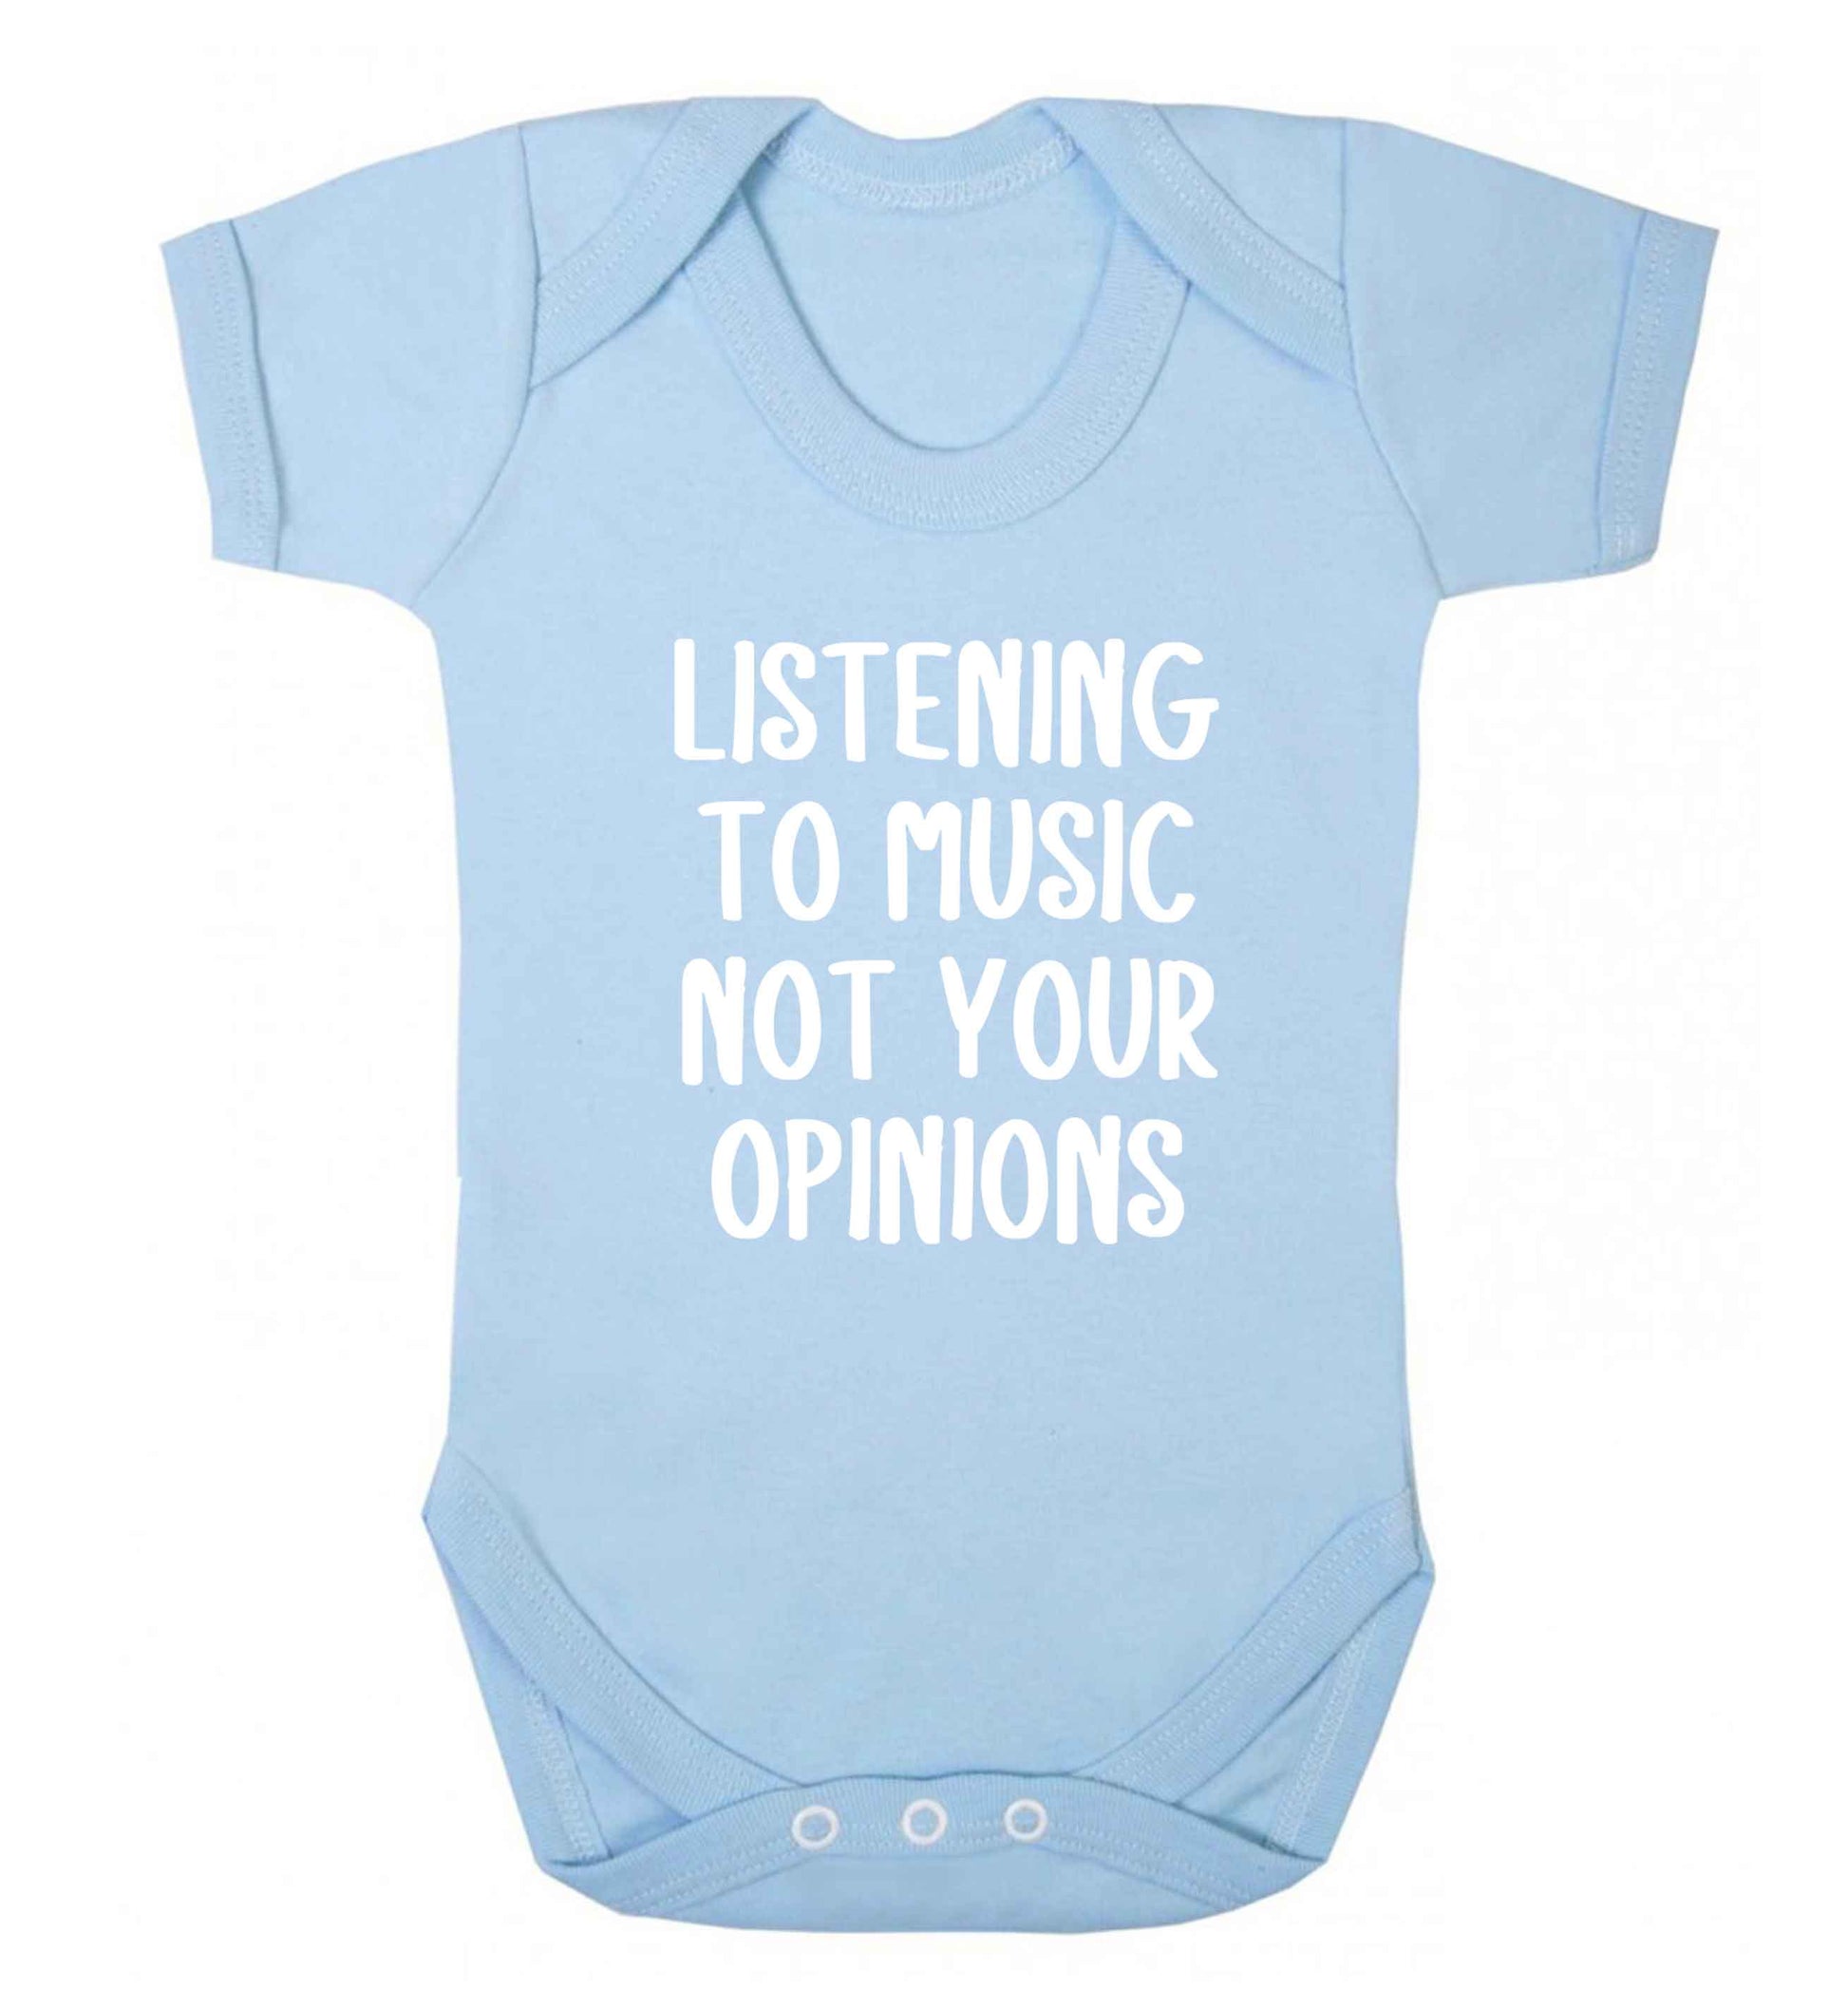 Listening to music not your opinions baby vest pale blue 18-24 months